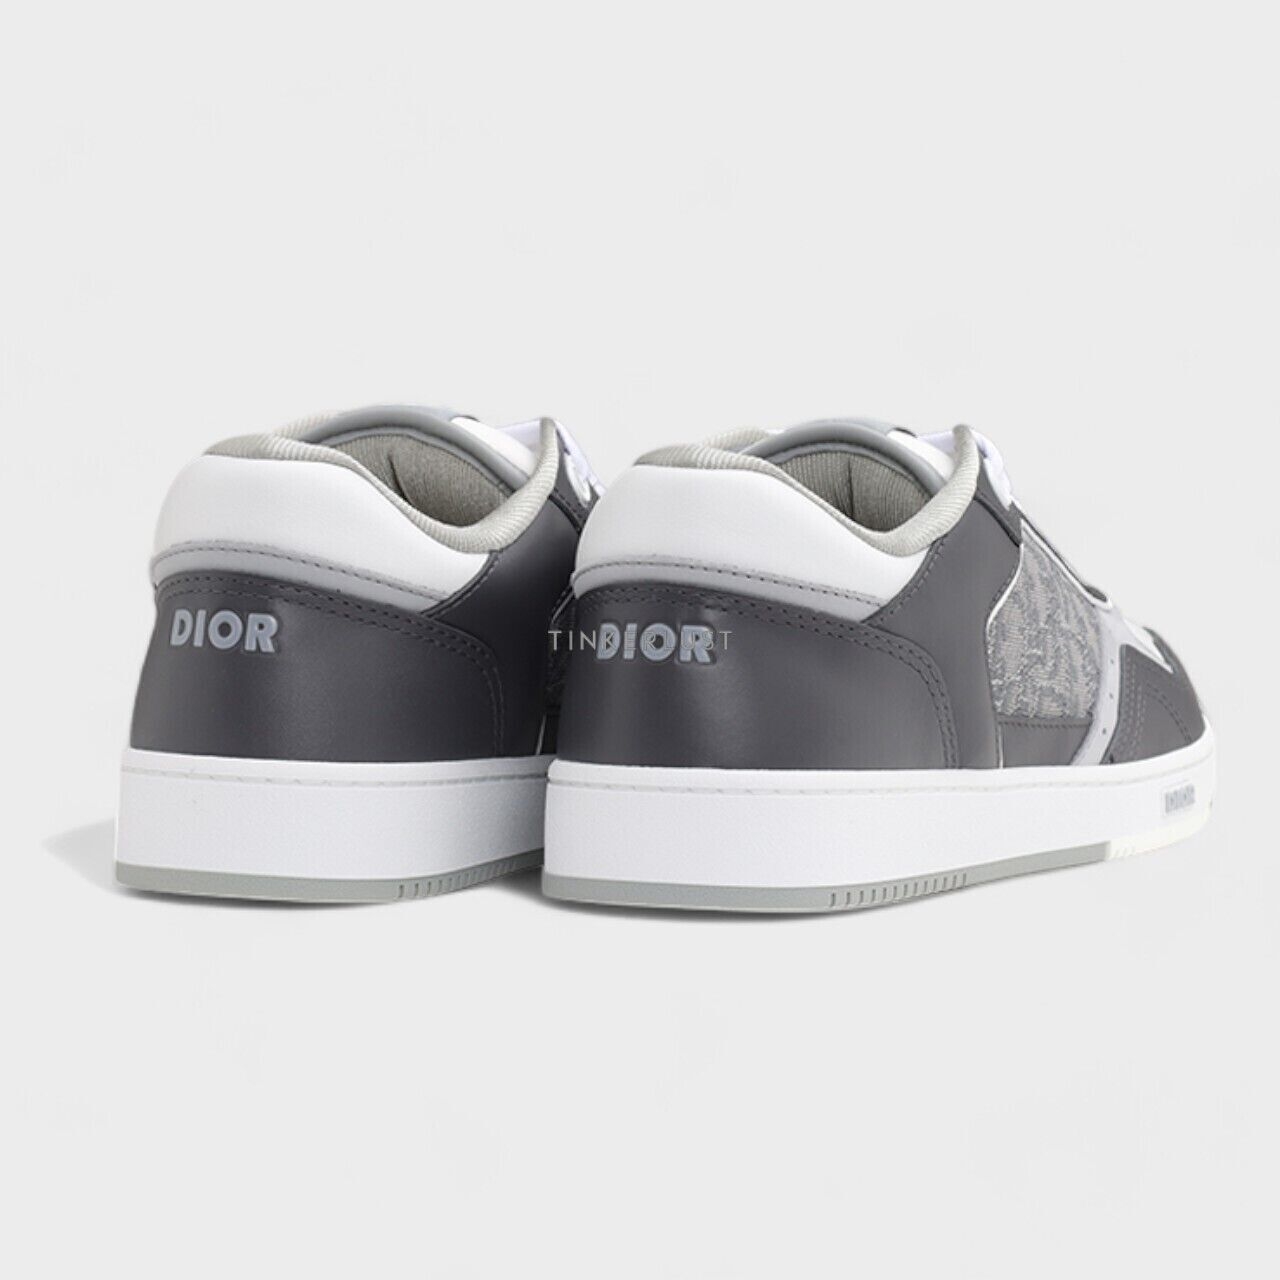 Christian Dior B27 Oblique in Anthracite Gray/White Smooth Calfskin Low Top Sneakers